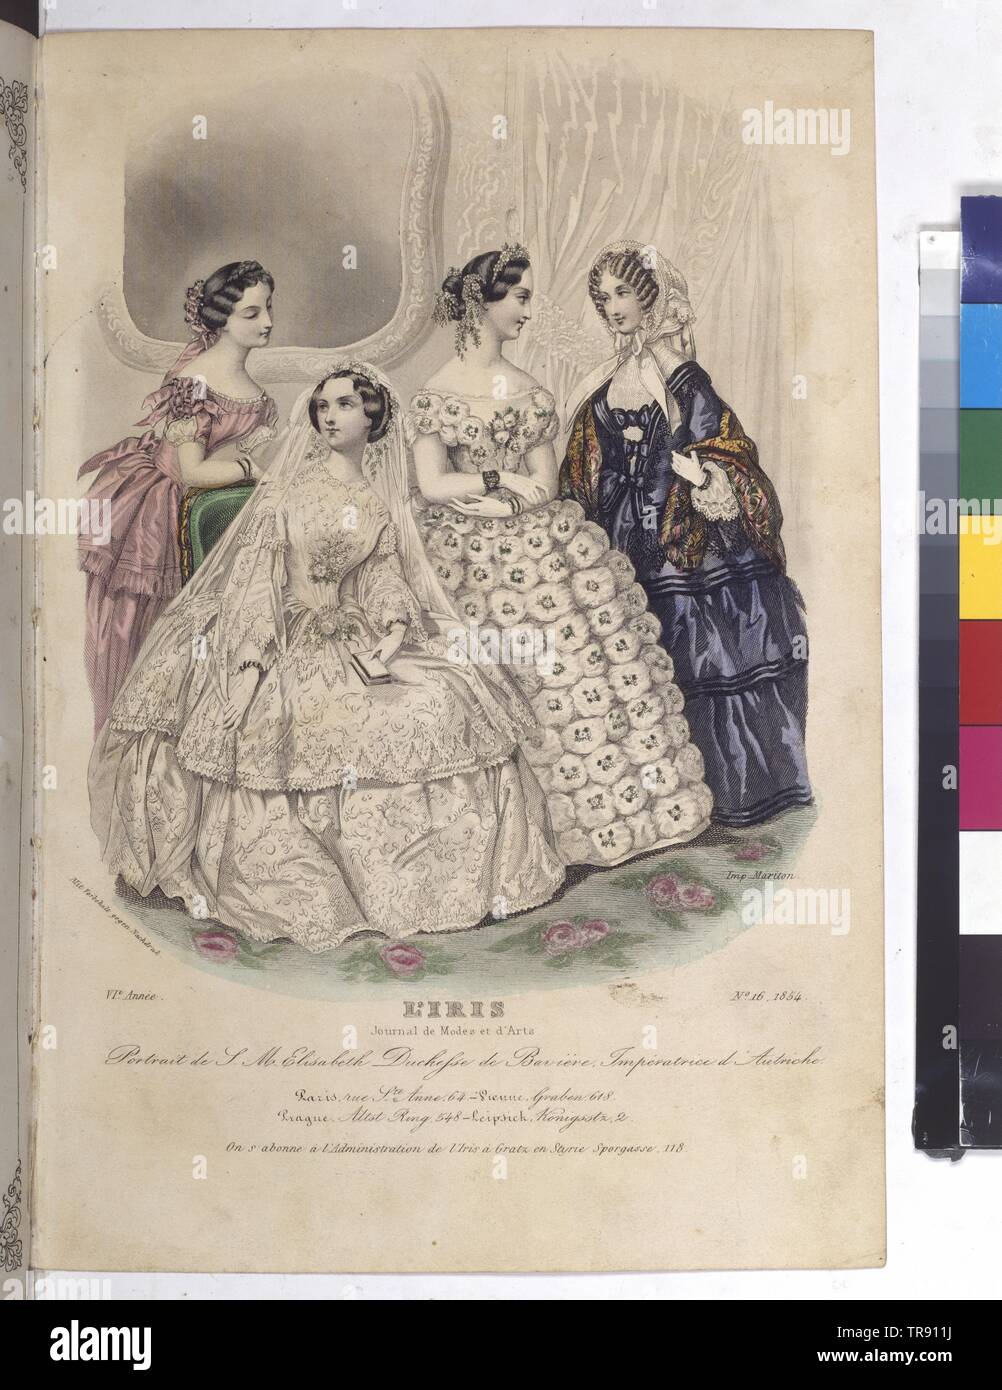 Elisabeth, Empress of Austria, empress Elisabeth in the wedding dress, together with three other women), coloured engraving in the fashion magazine 'Iris', Additional-Rights-Clearance-Info-Not-Available Stock Photo